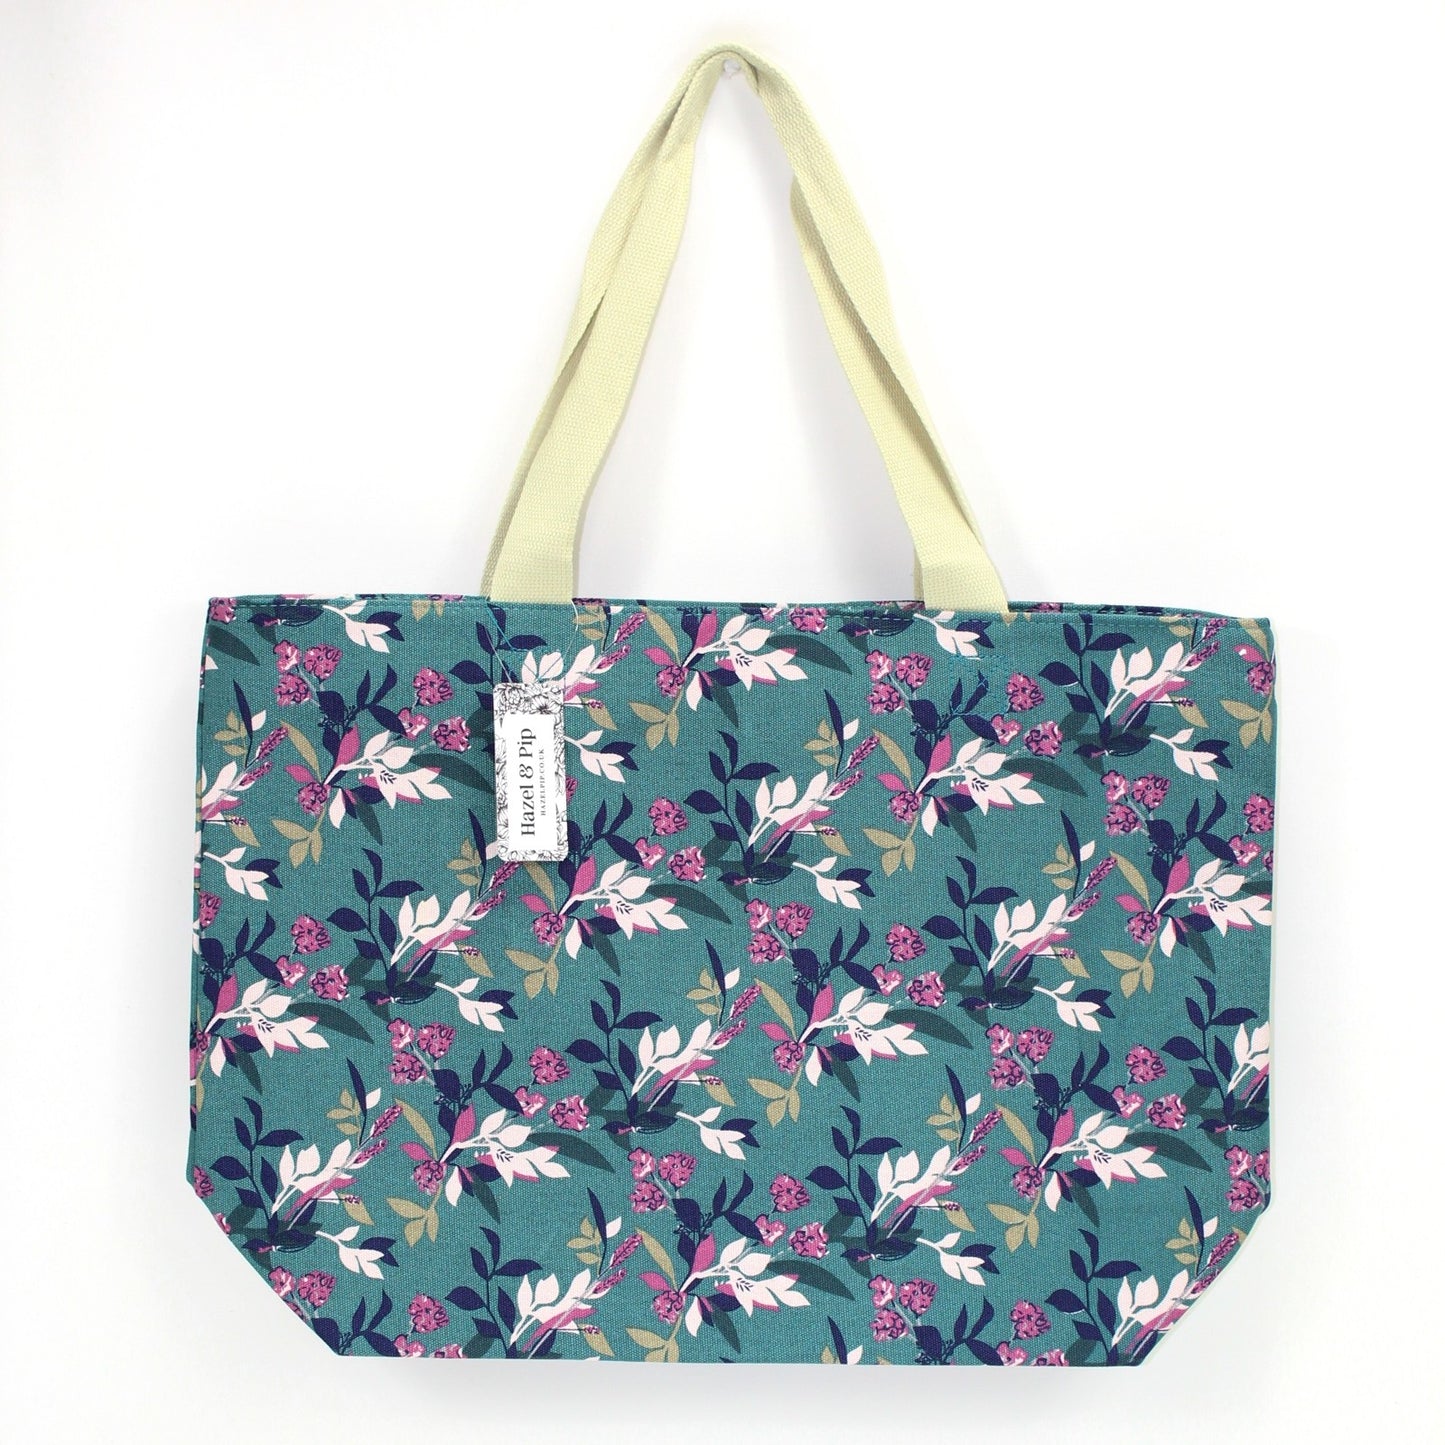 Large canvas bag with vintage style floral print, on a solid green coloured background